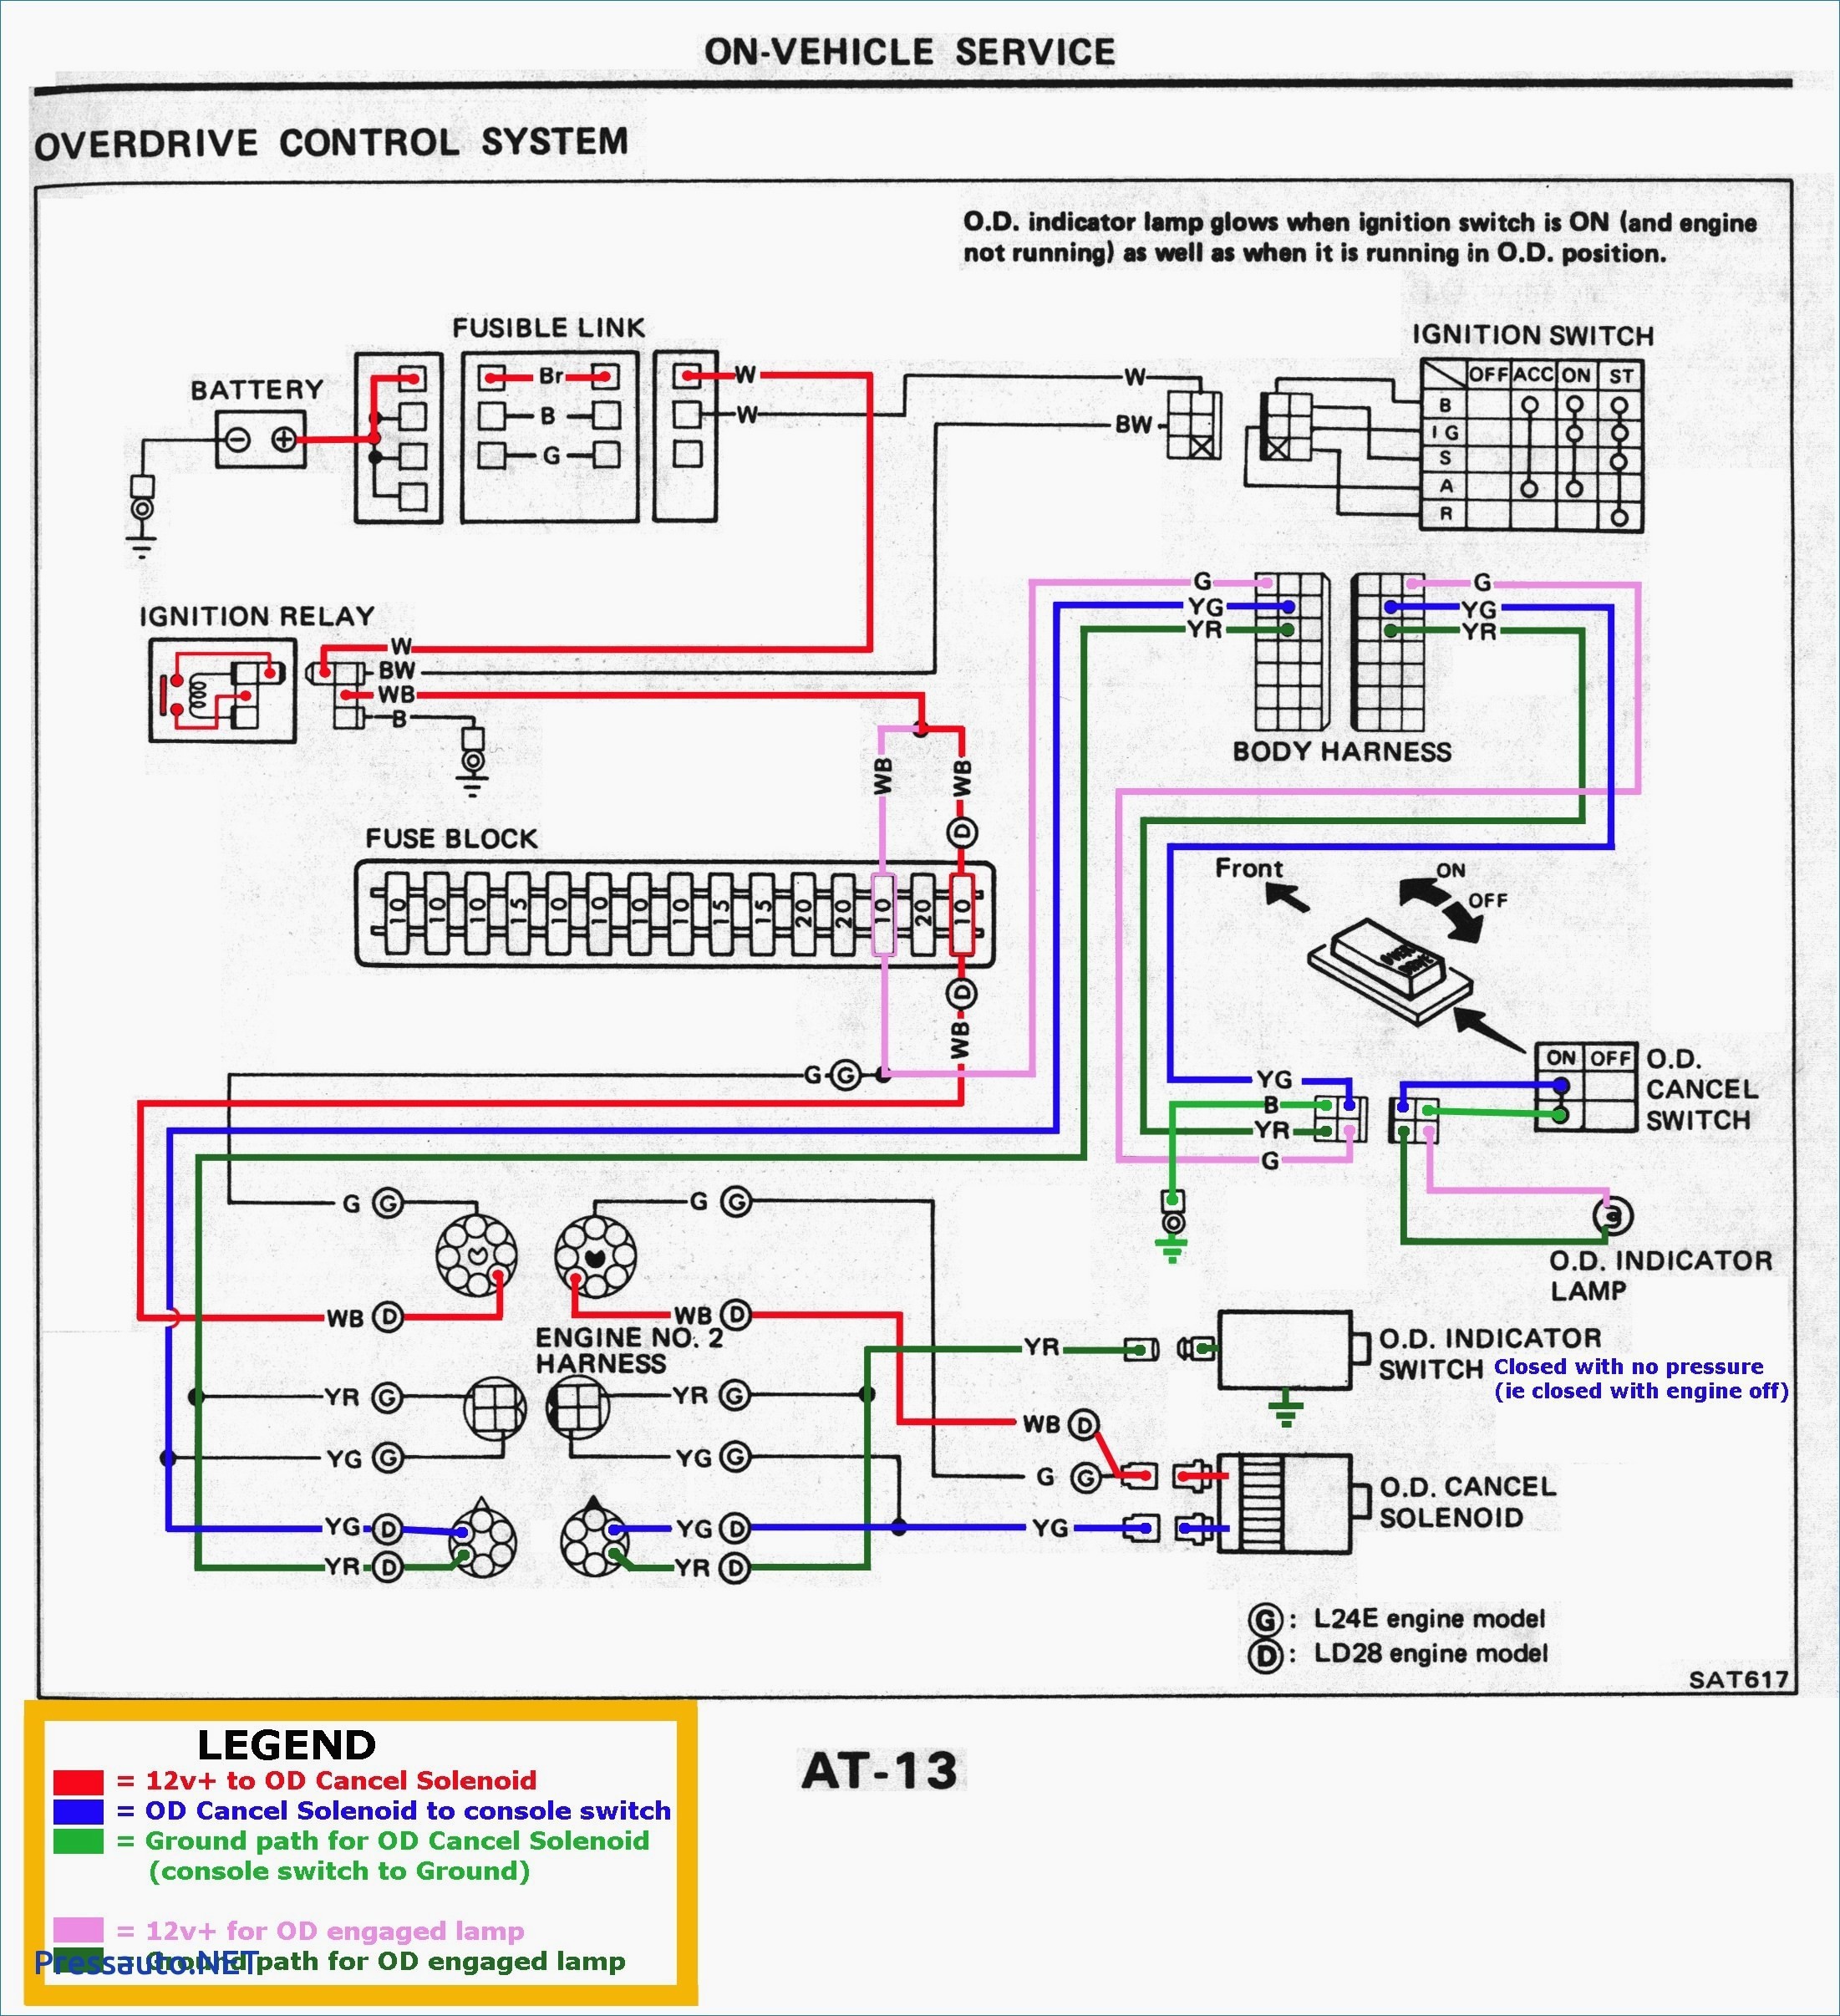 Wiring Diagram for 3 Way toggle Switch Refrence 3 Position Ignition Switch Wiring Diagram New Electrical